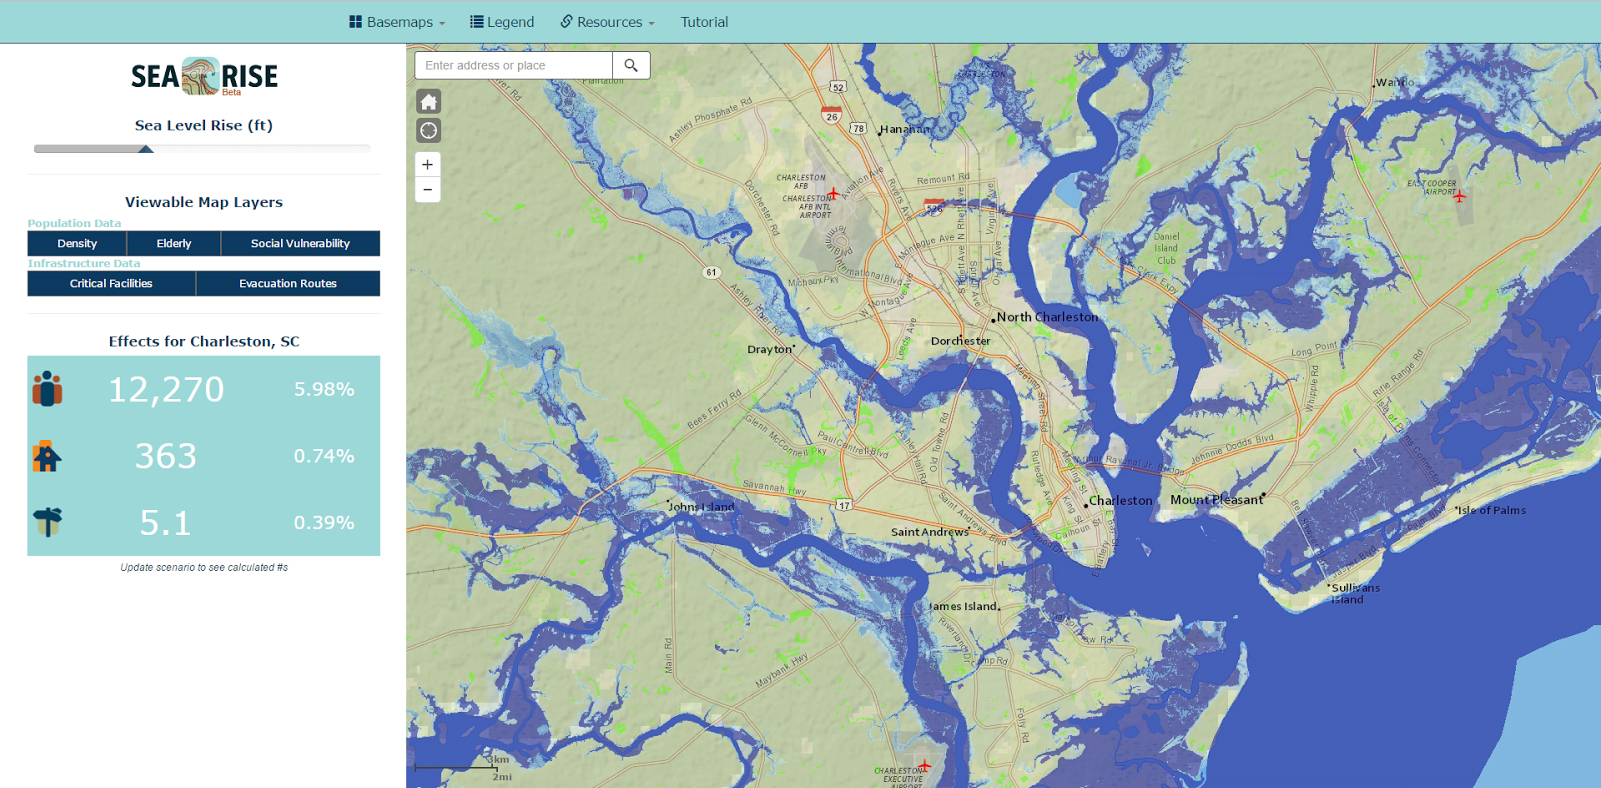 South Carolina Aquarium uses data and map services from Sea Level Rise Viewer to view potential impacts of flooding and storm surge on the community